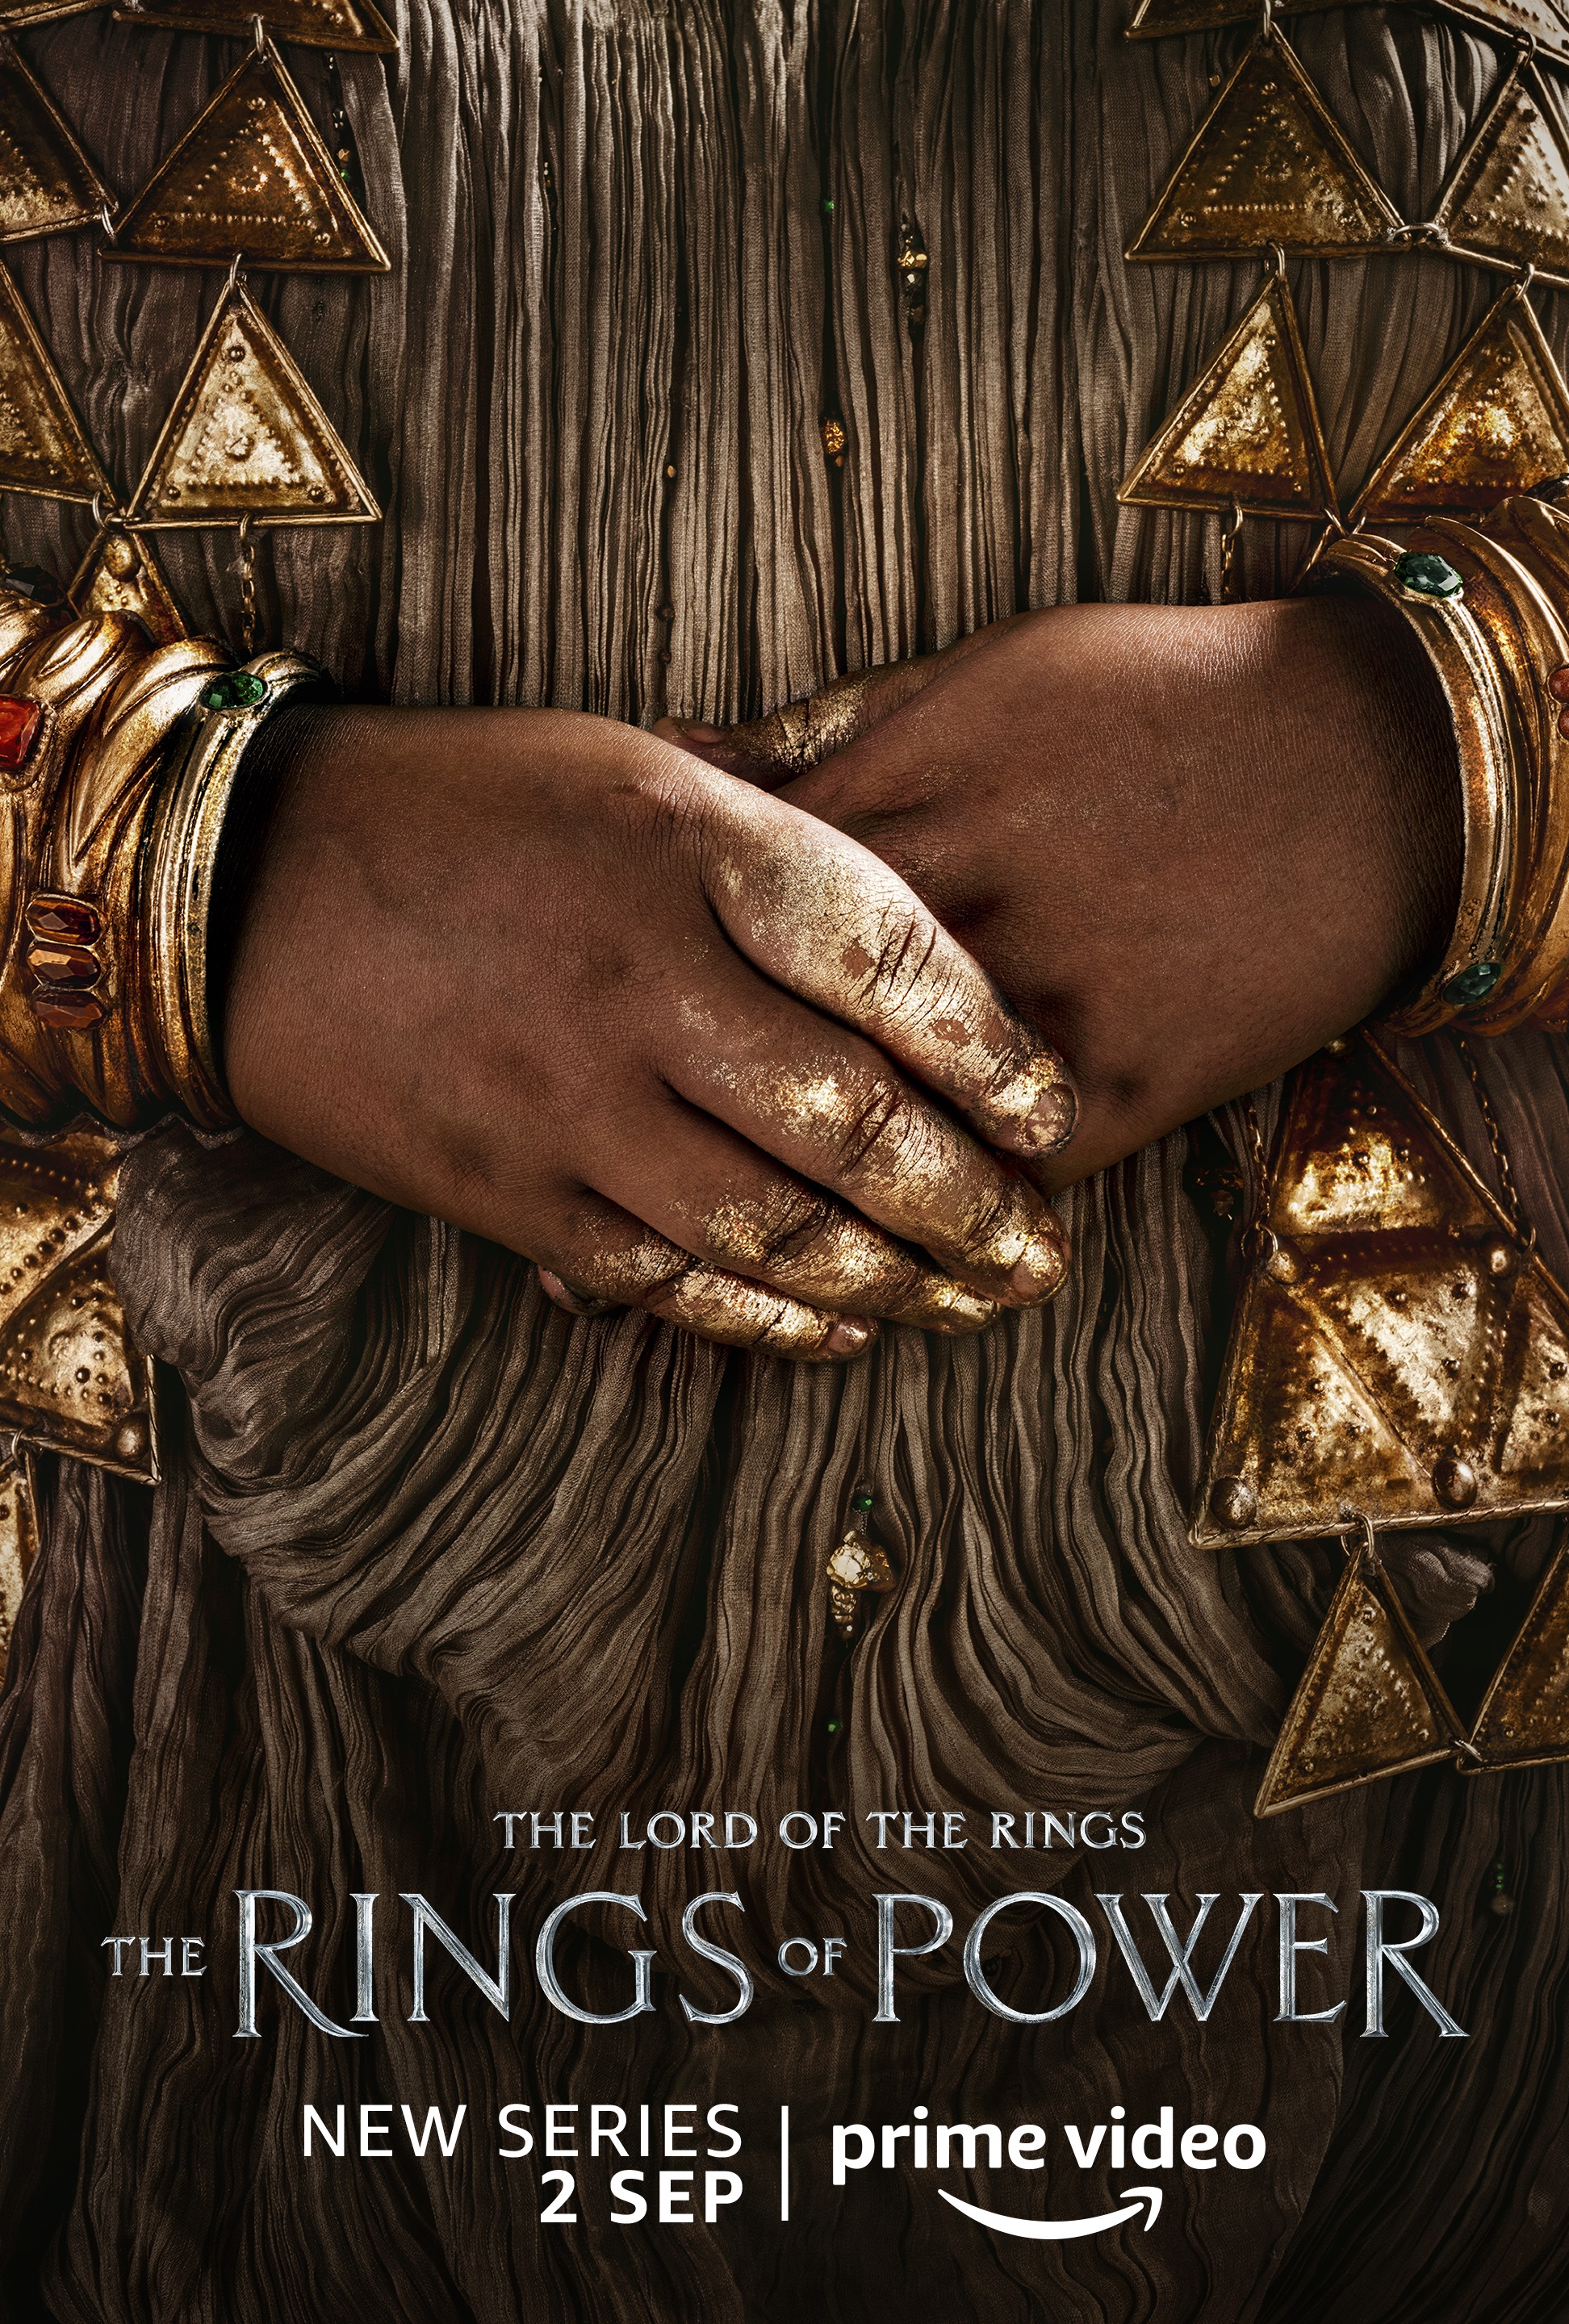 A Harfoot character poster for Lord of the Rings: The Rings of Power